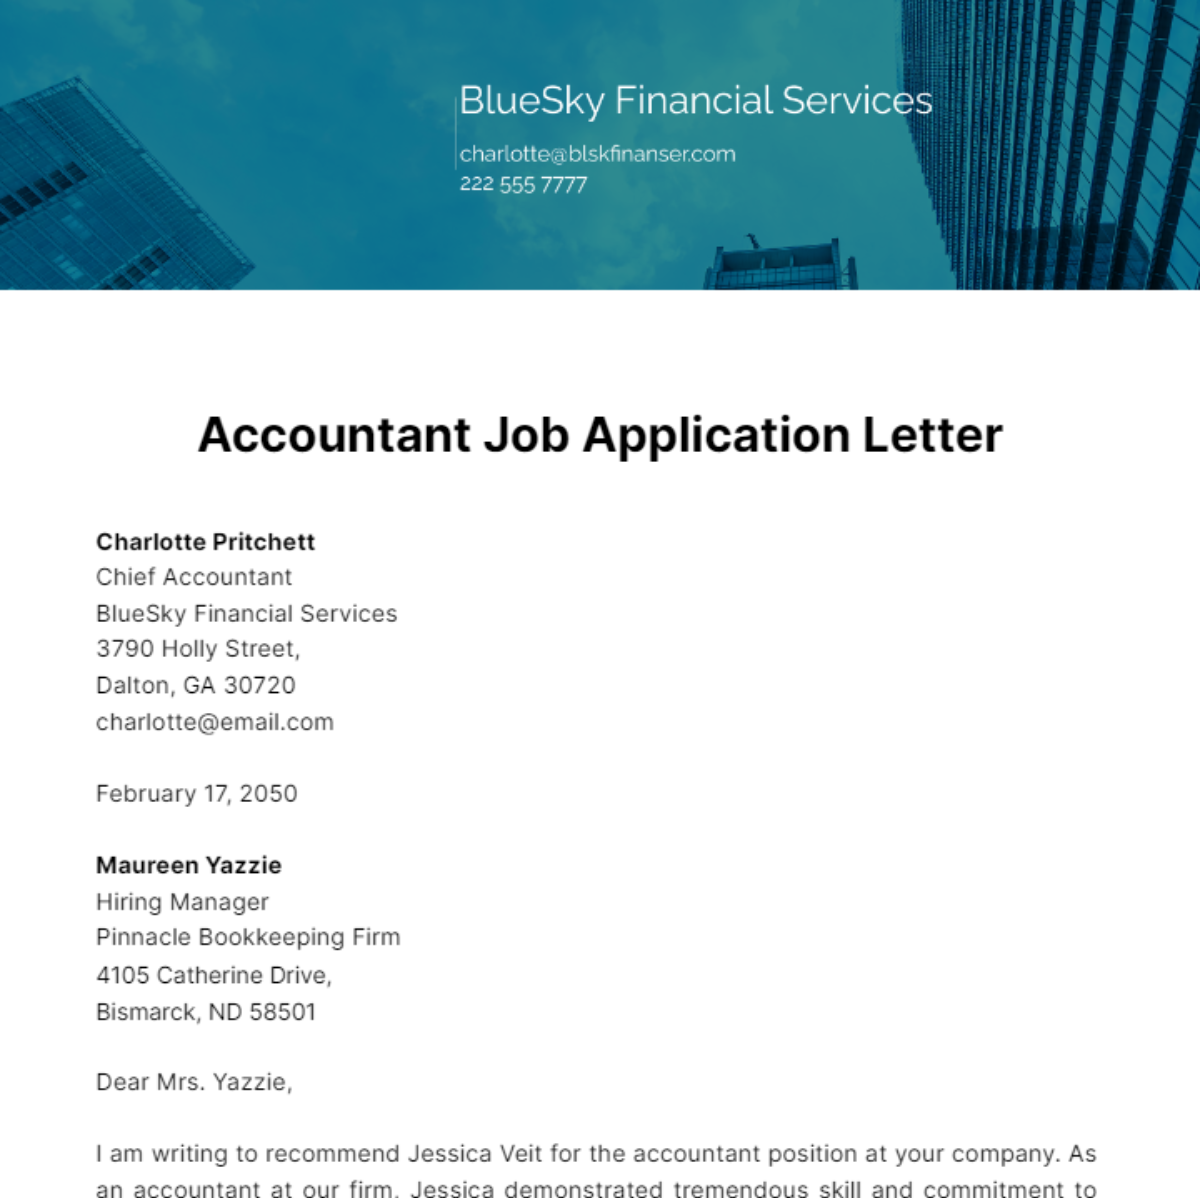 Accountant Job Application Letter Template